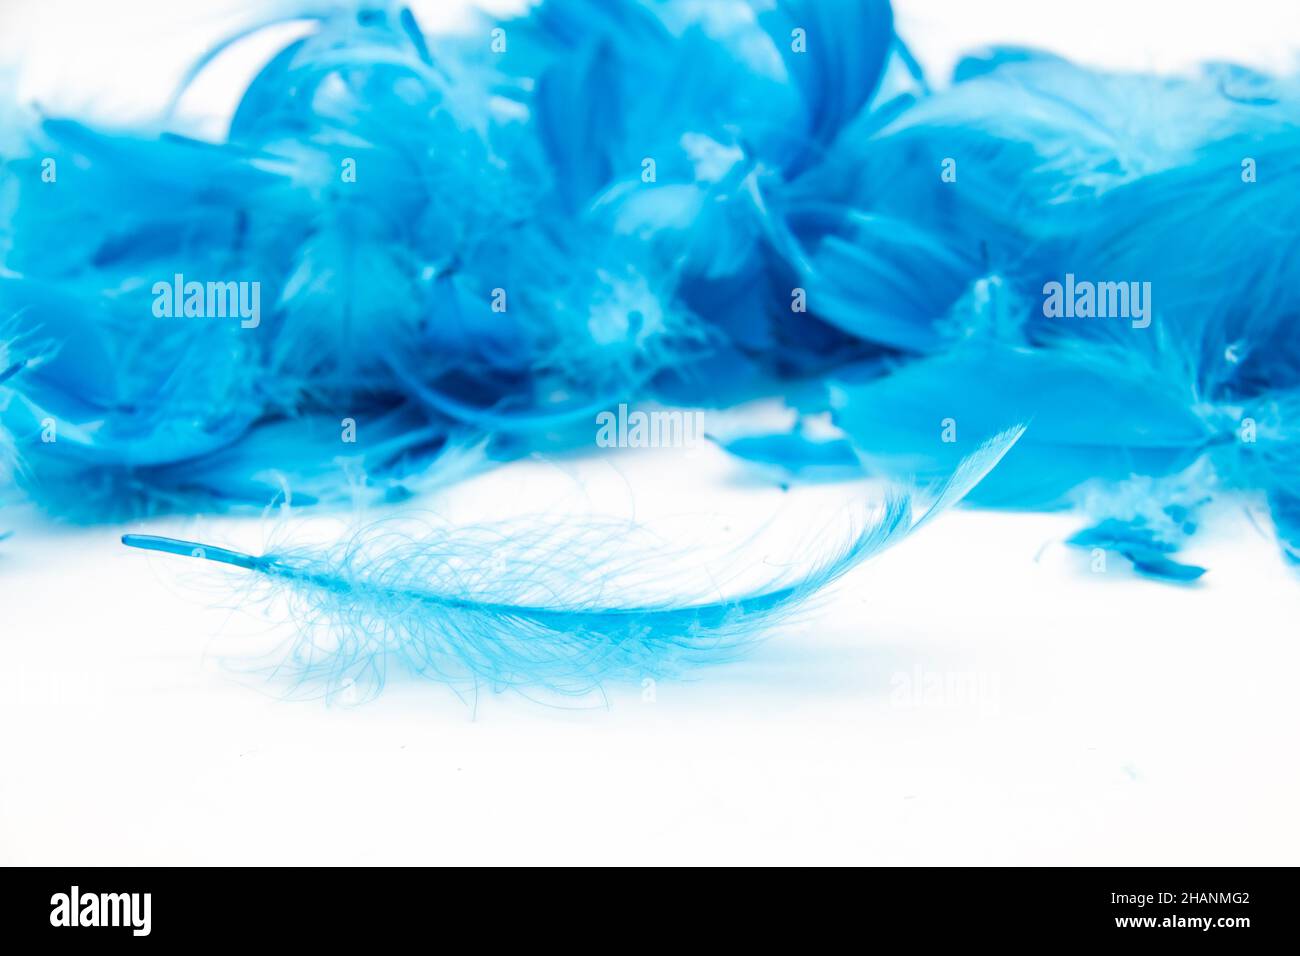 Blue fluffy bird feathers on a white background. A texture of a soft feathers. Stock Photo